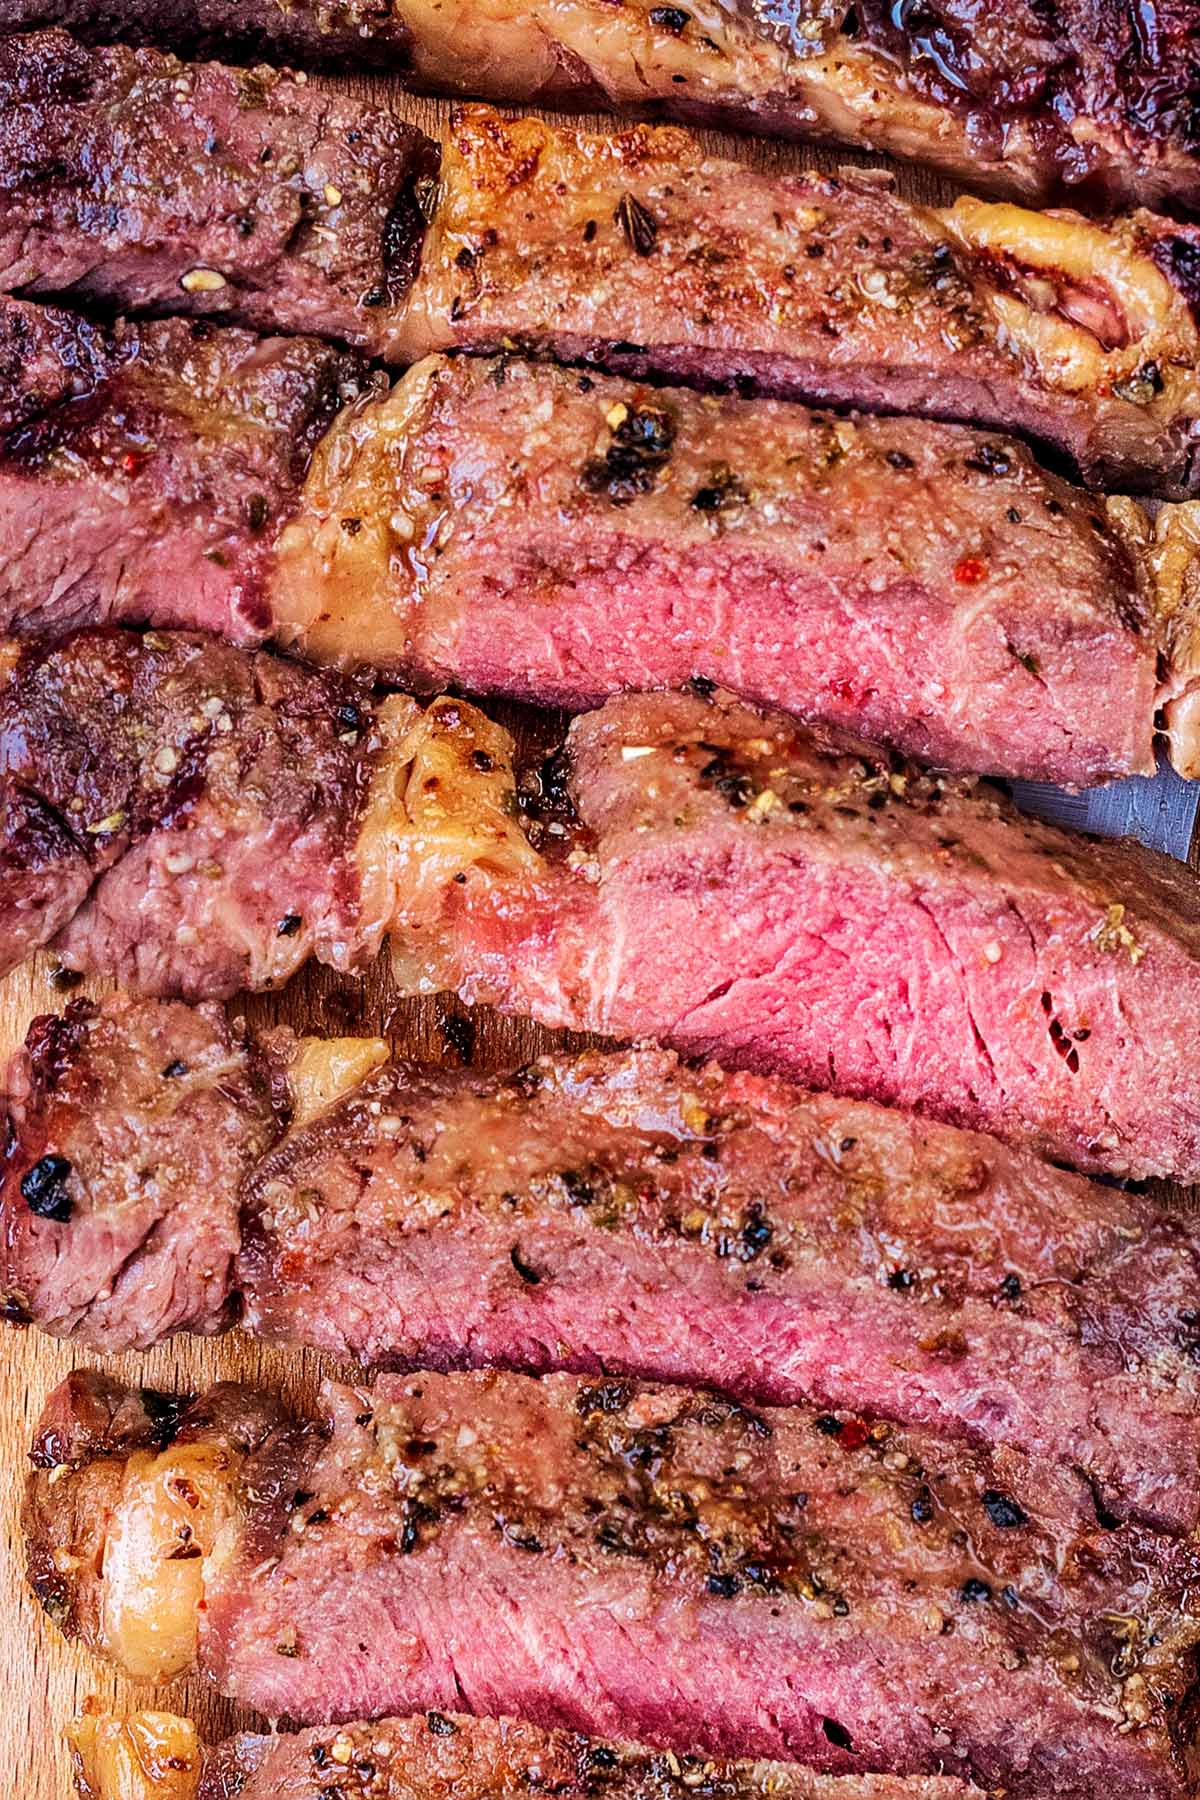 Strips of cooked steak showing a pink middle.